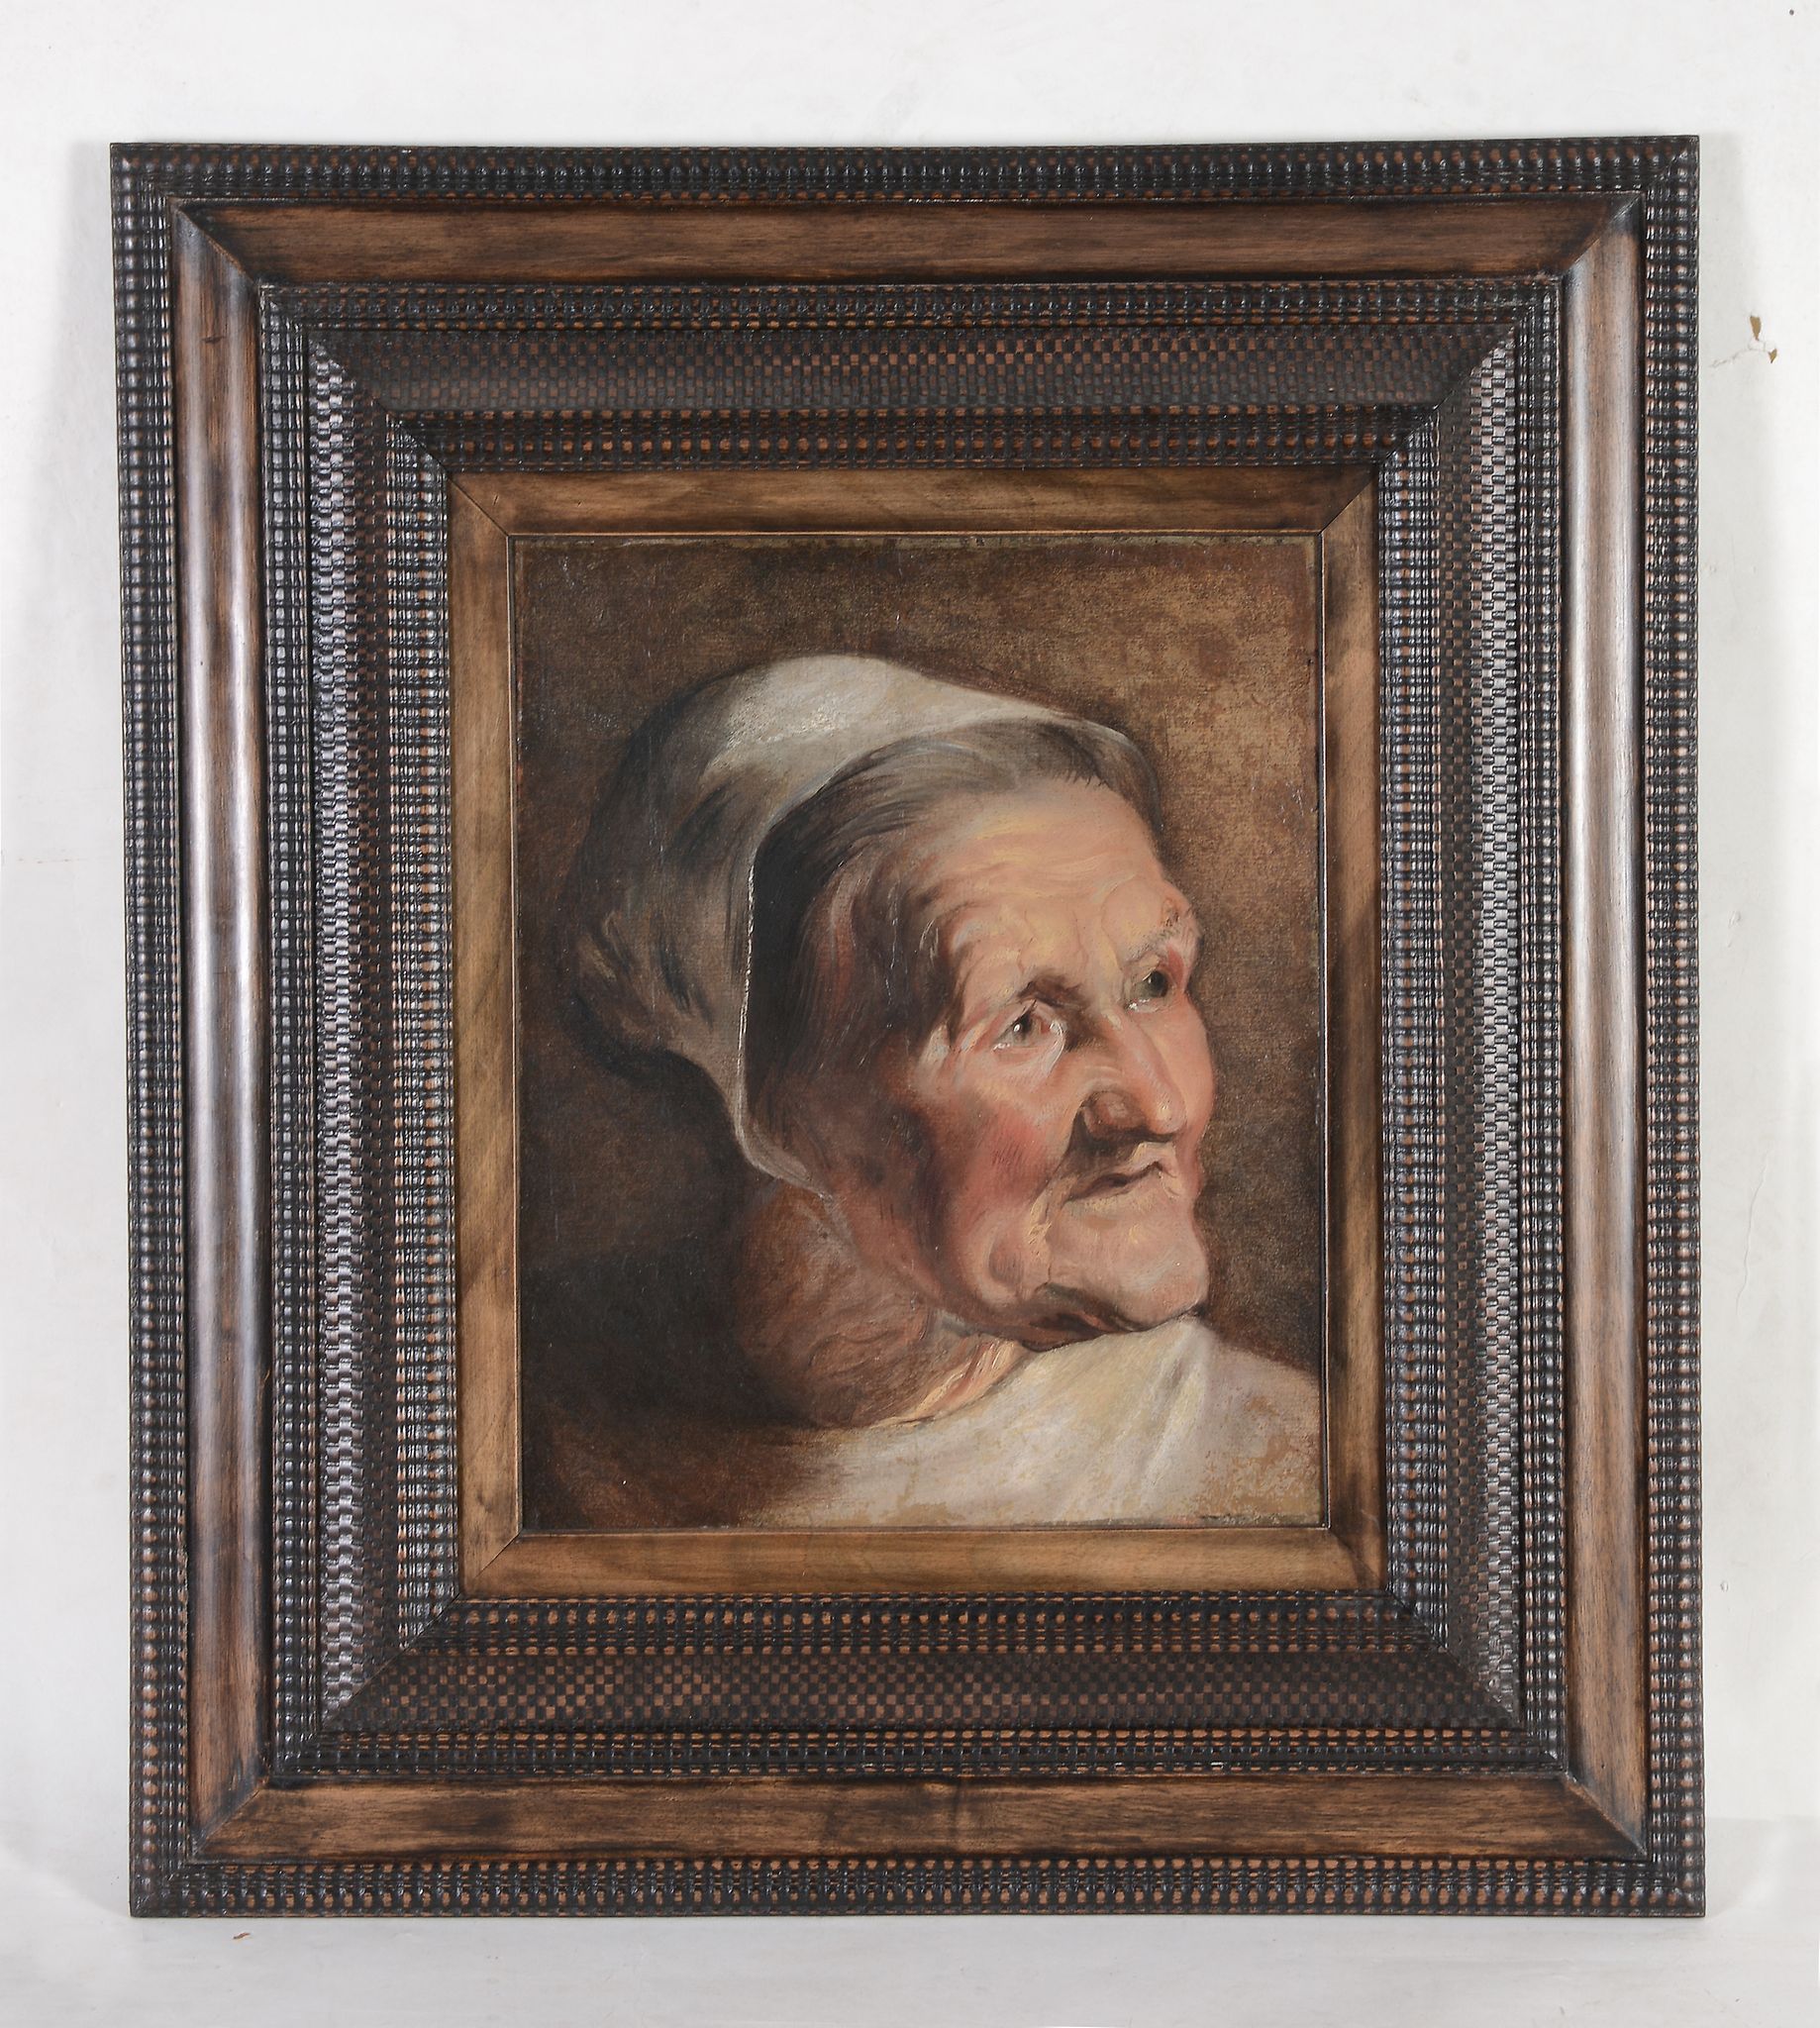 Attributed to Jacob Jordaens (1593-1678) - Study of an old woman's head, looking upwards to her - Image 2 of 2